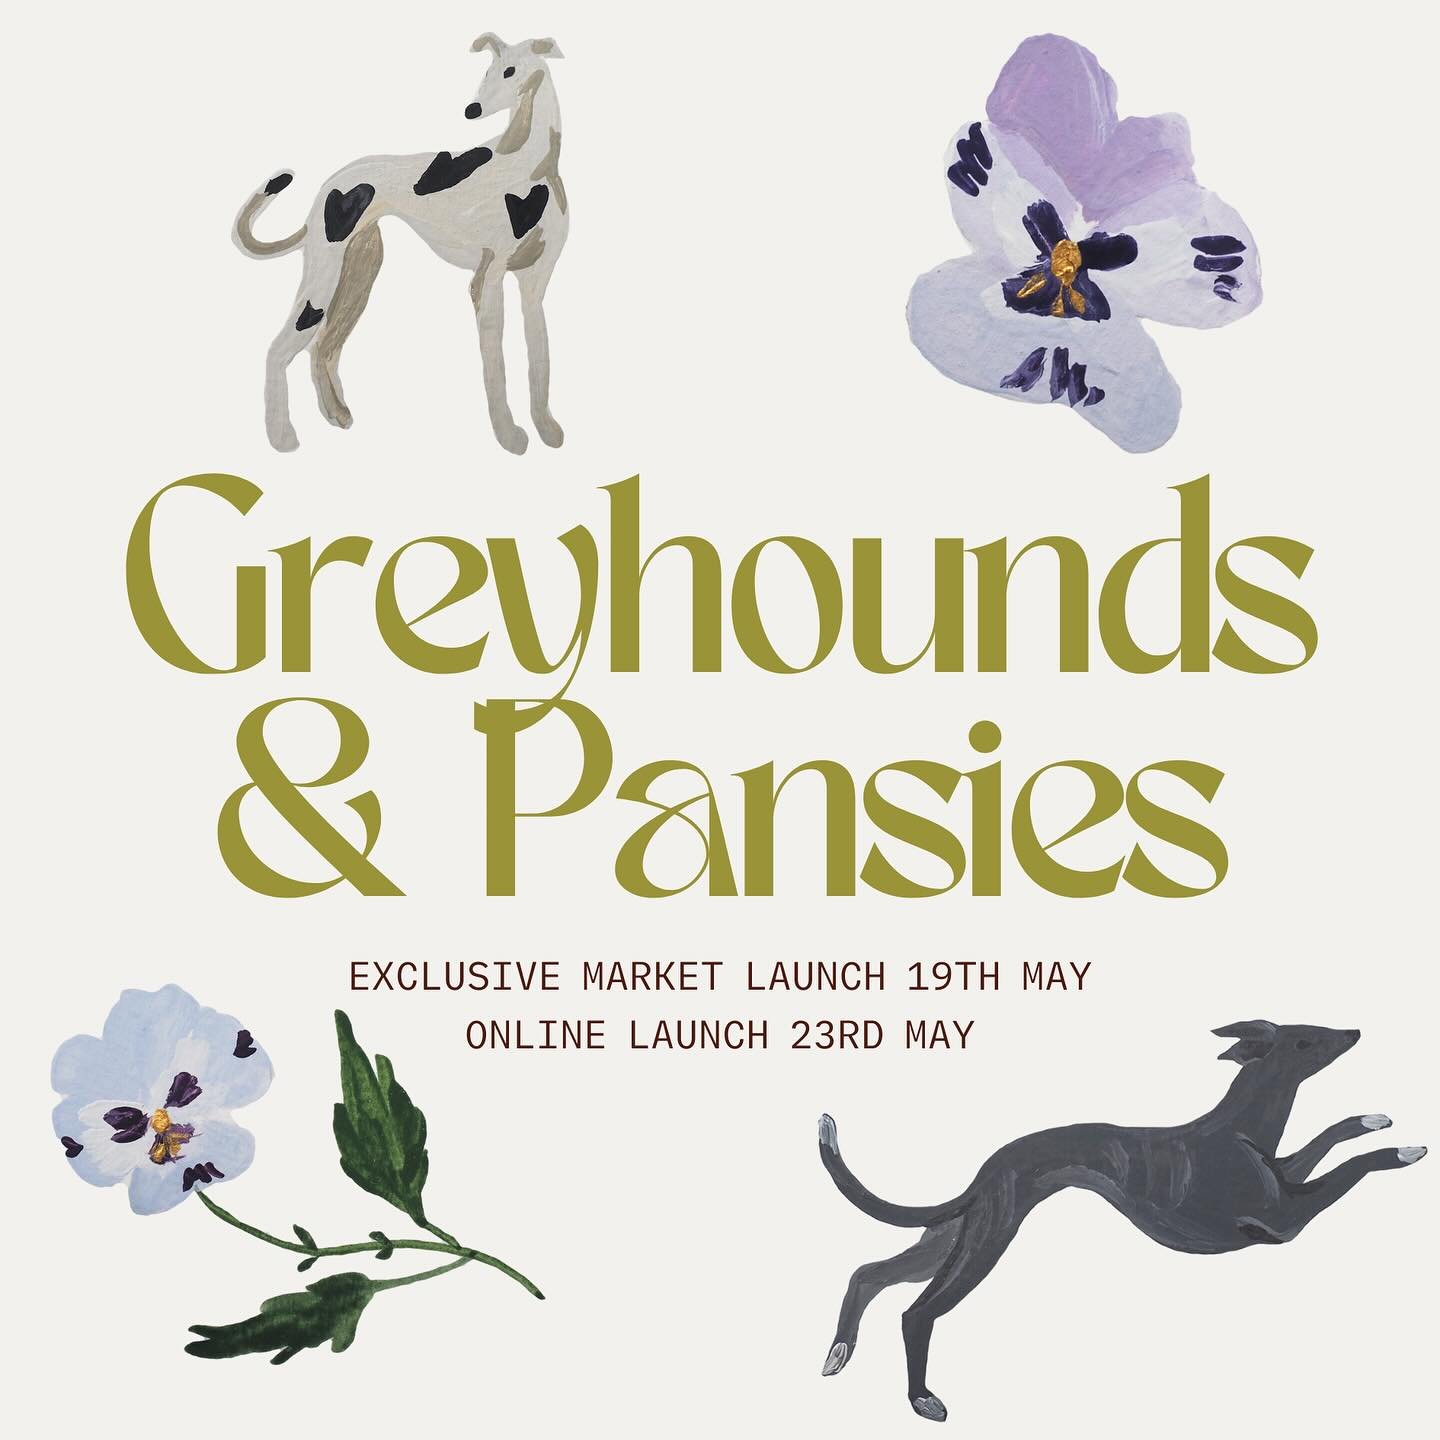 Some exciting things coming in the next couple of weeks 🤠

🌸 Greyhounds and Pansies collection launching exclusively at @slowlymadelocals market in Brissy on the 19th May

🌸 Online launch on the 23rd May 6pm AEST. Including some very cute new grey